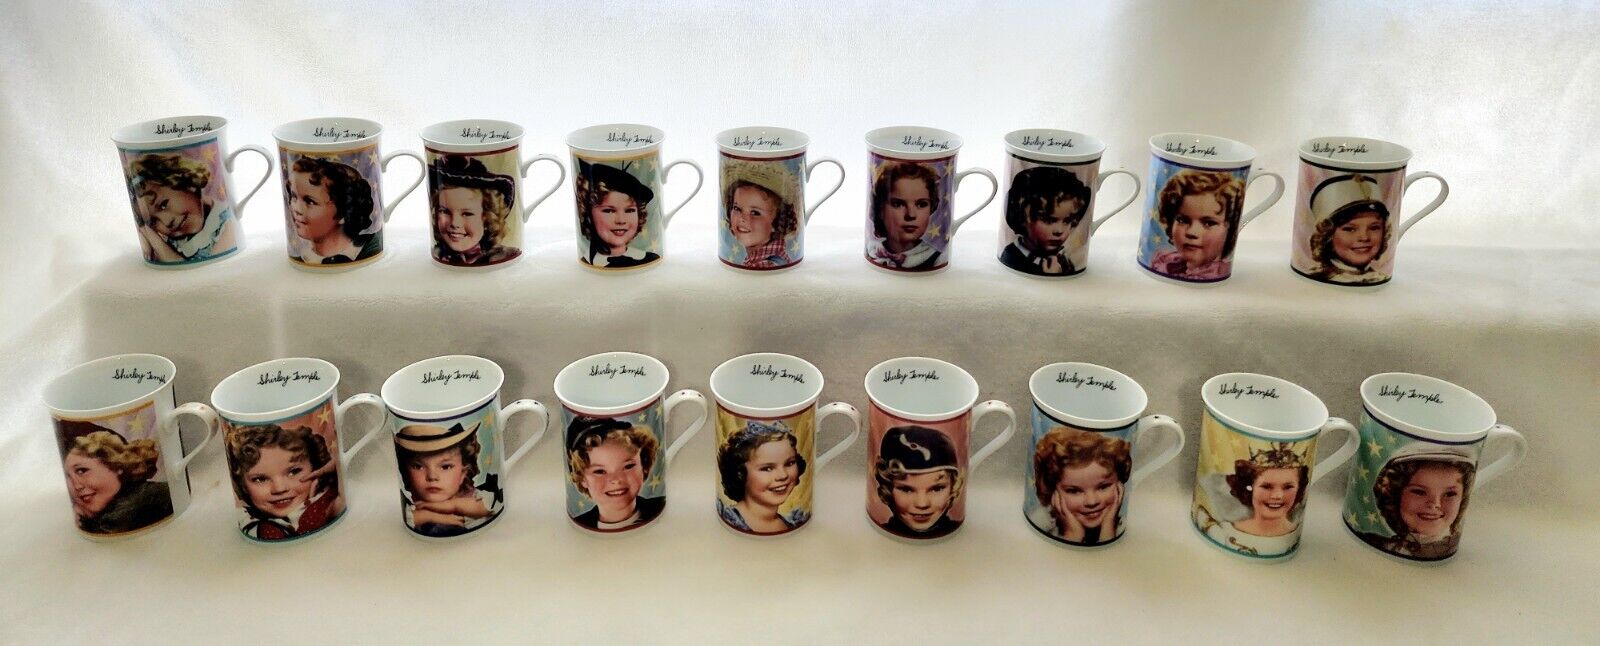 Shirley Temple The Danbury Mint Mug Collection Pre-Owned Comple Set of 18